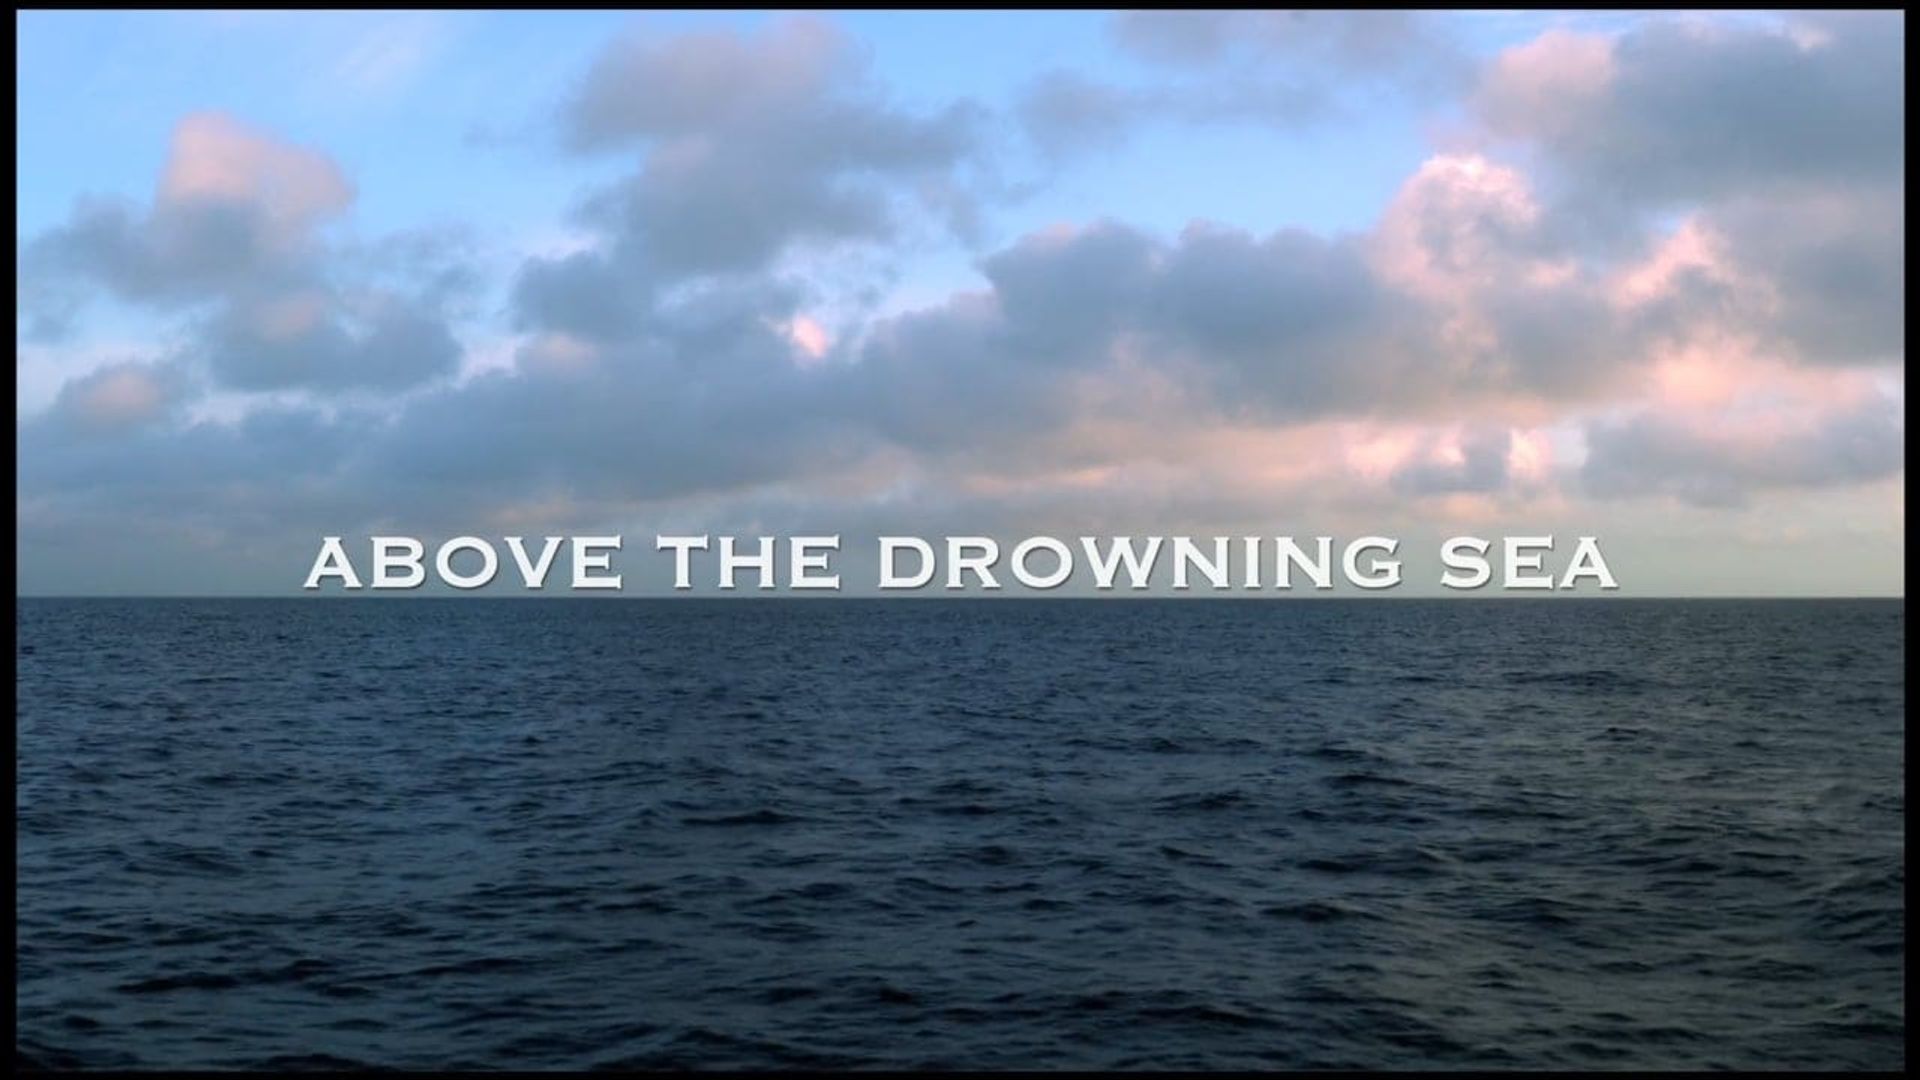 Above the Drowning Sea background